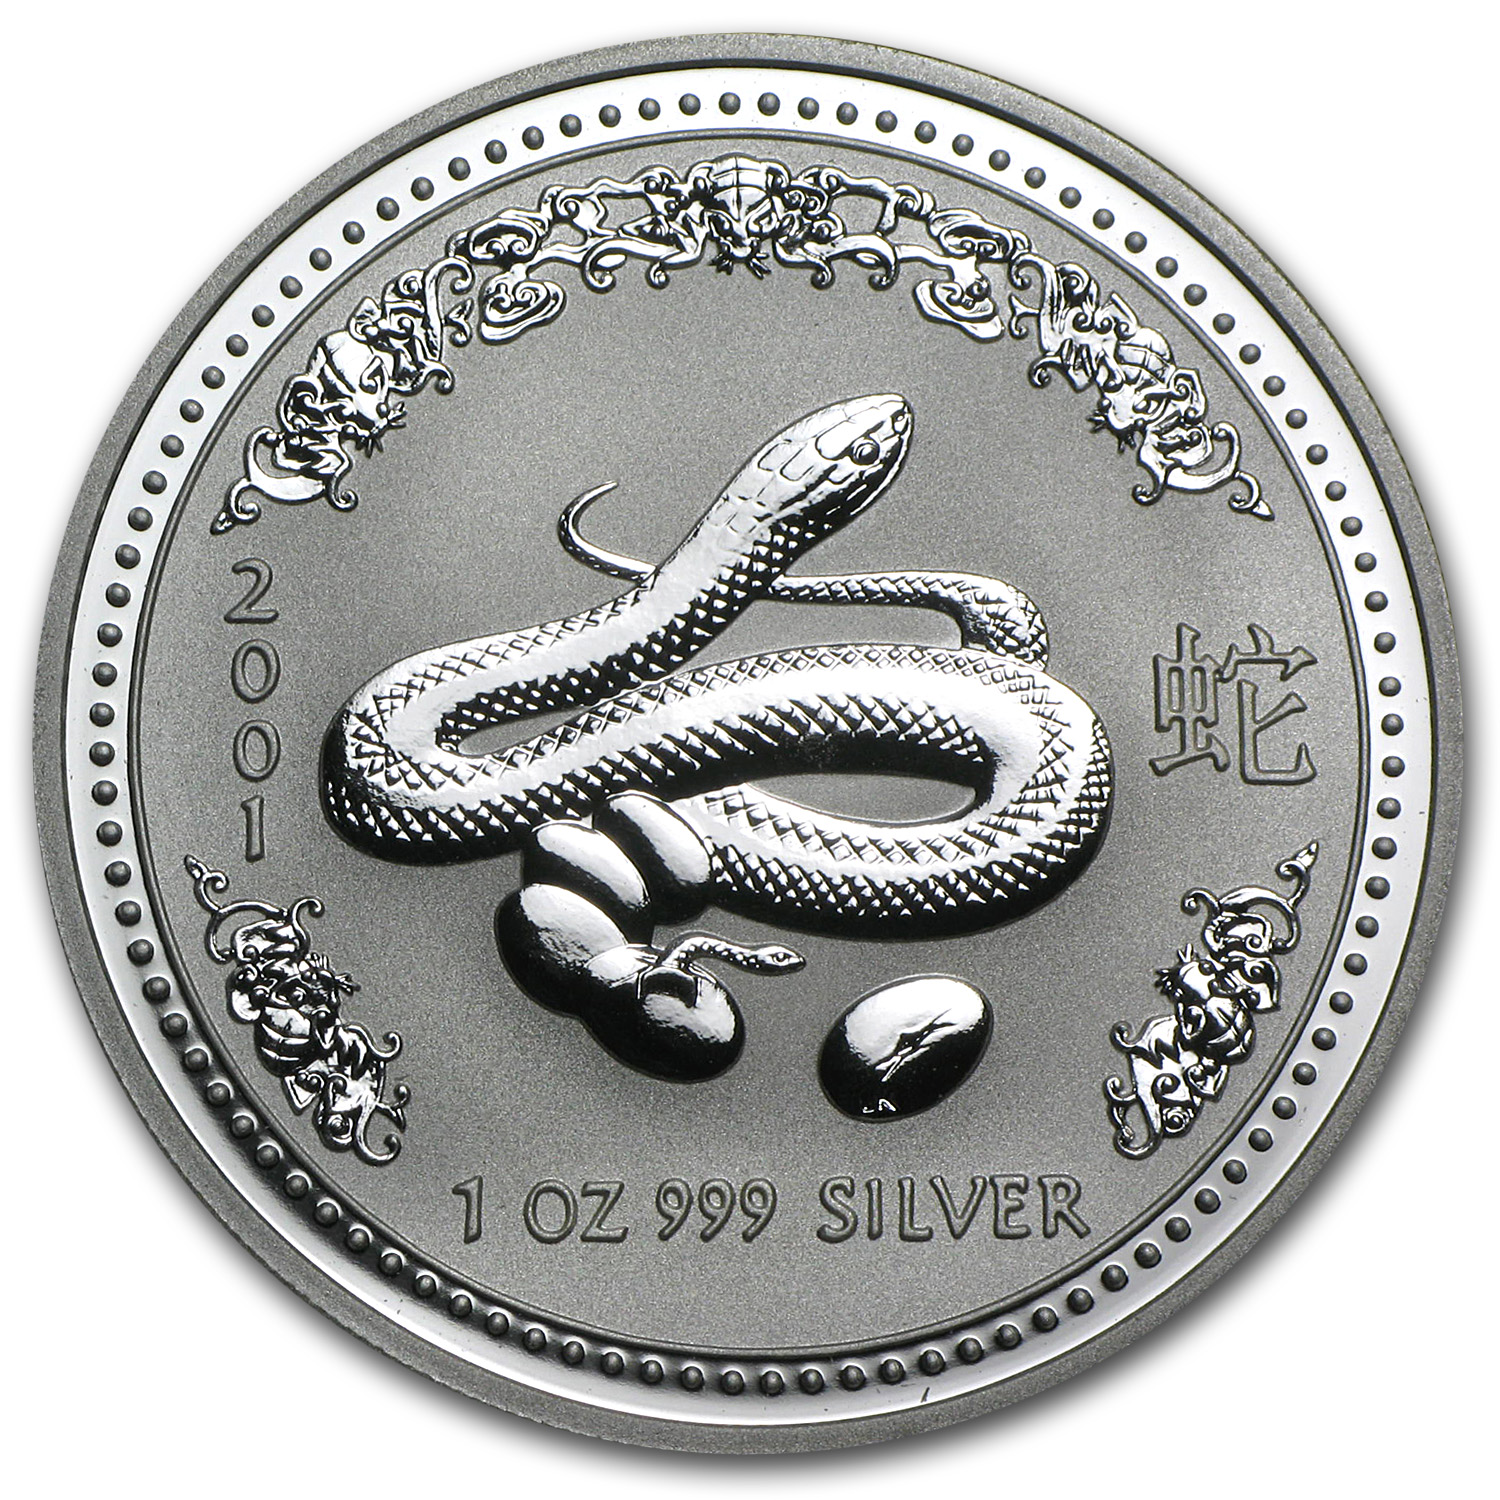 Buy 2001 Australia 1 oz Silver Year of the Snake BU (Series I) - Click Image to Close